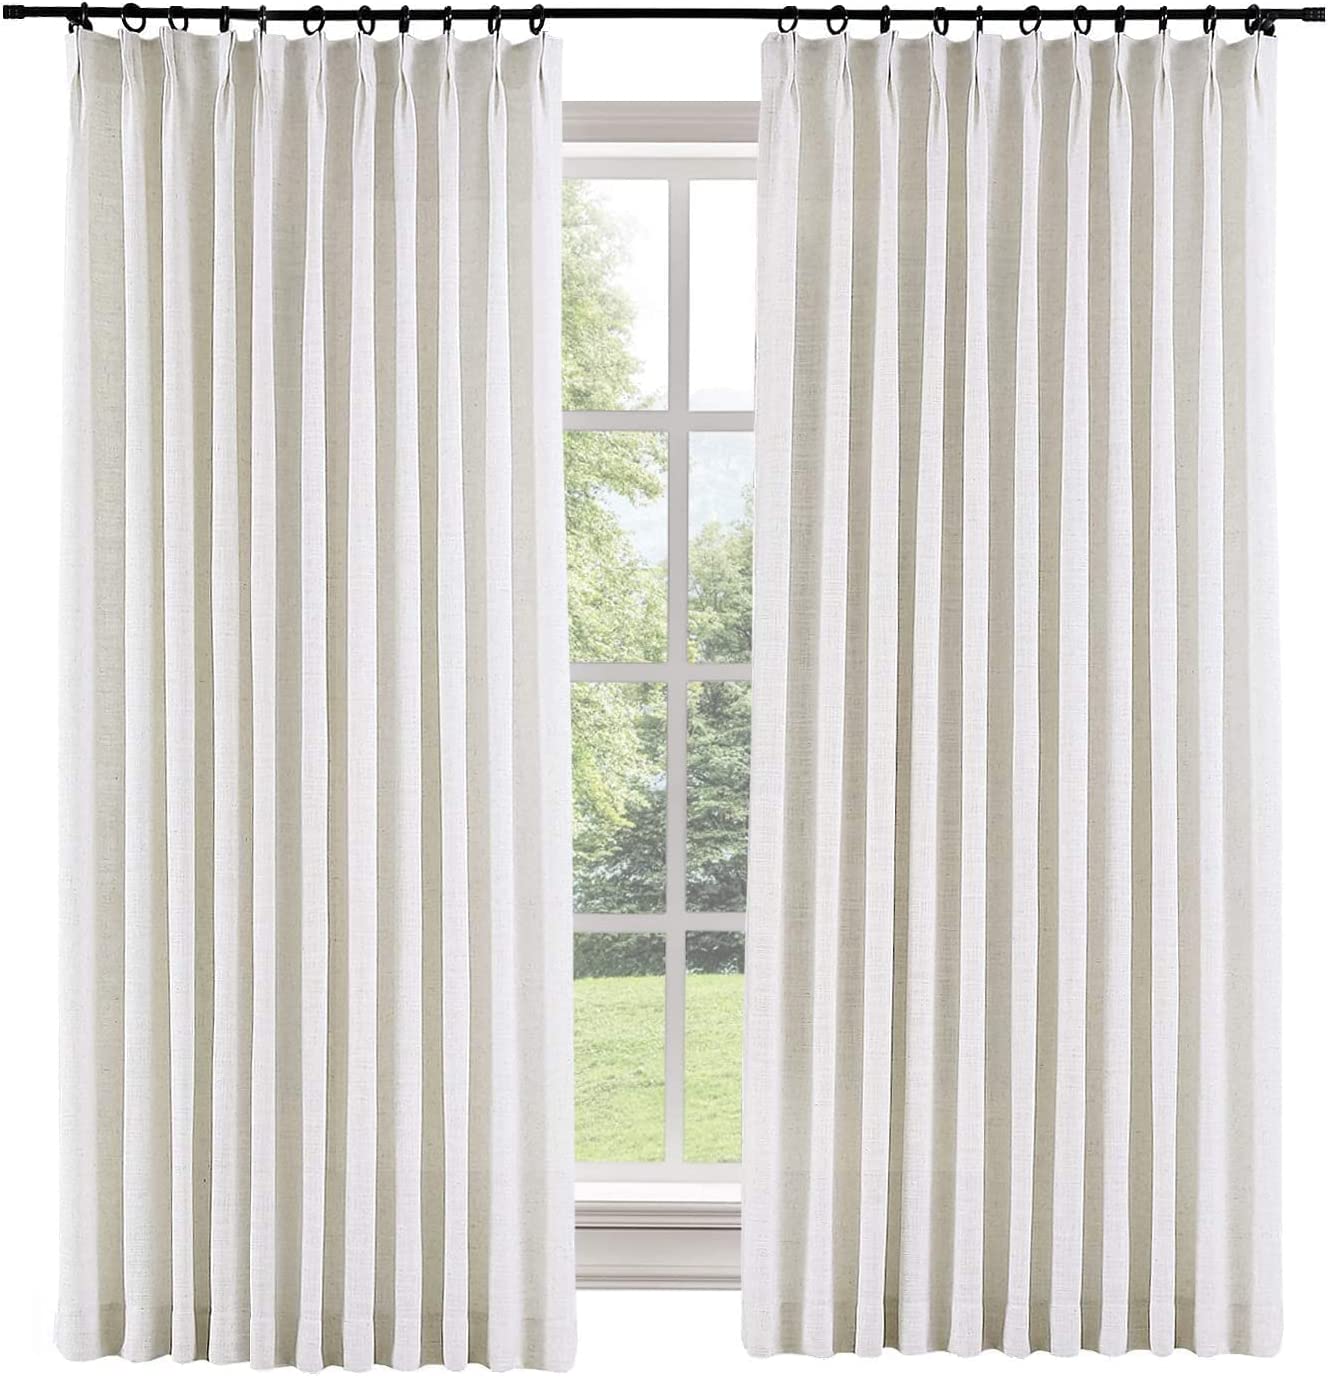 TWOPAGES 52 W x 120 L inch Pinch Pleat Darkening Drapes Faux Linen Curtains with Blackout Lining Drapery Panel for Living Room Bedroom Meetingroom Clu